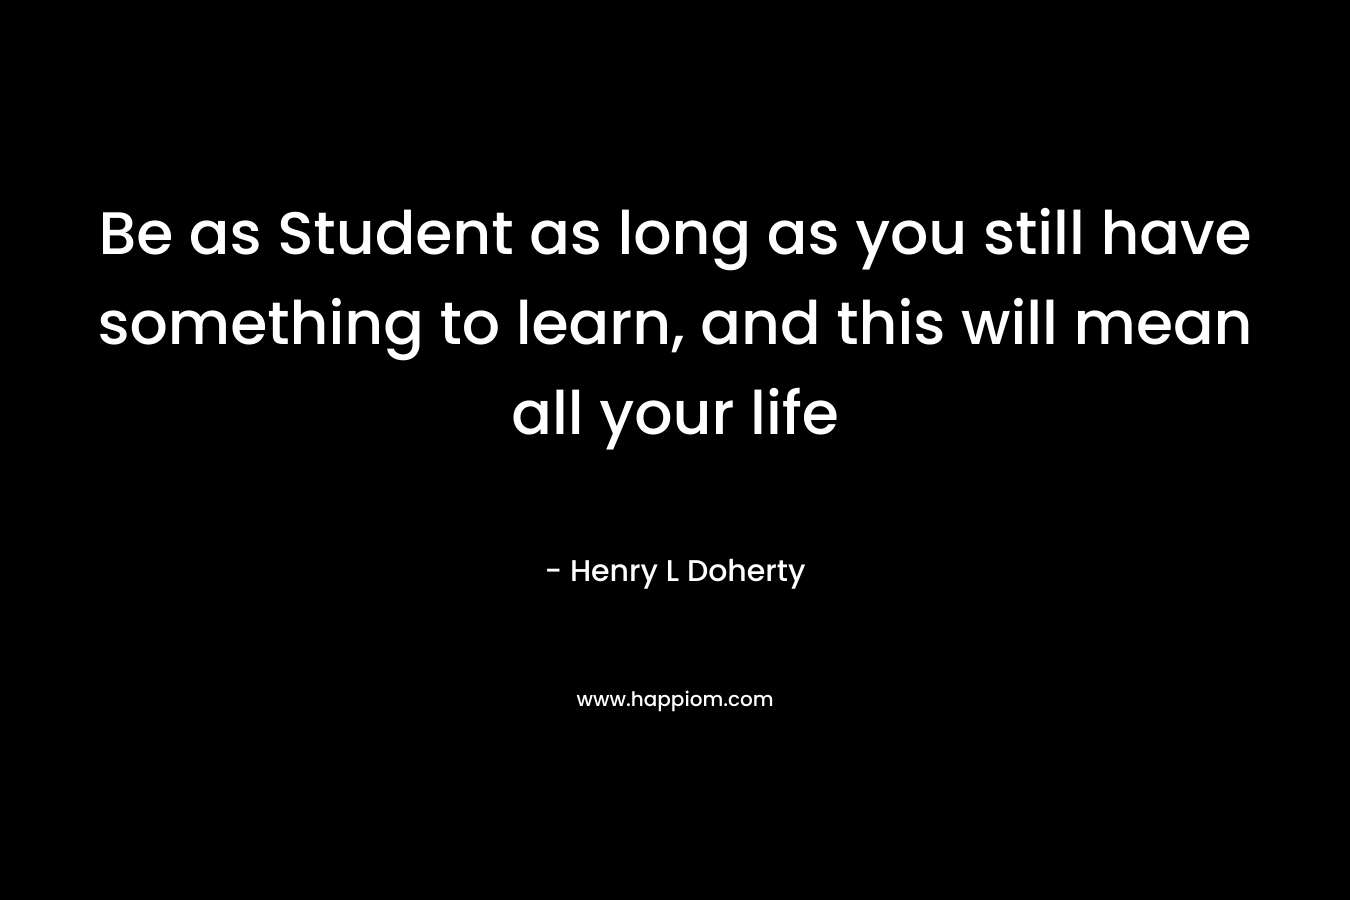 Be as Student as long as you still have something to learn, and this will mean all your life